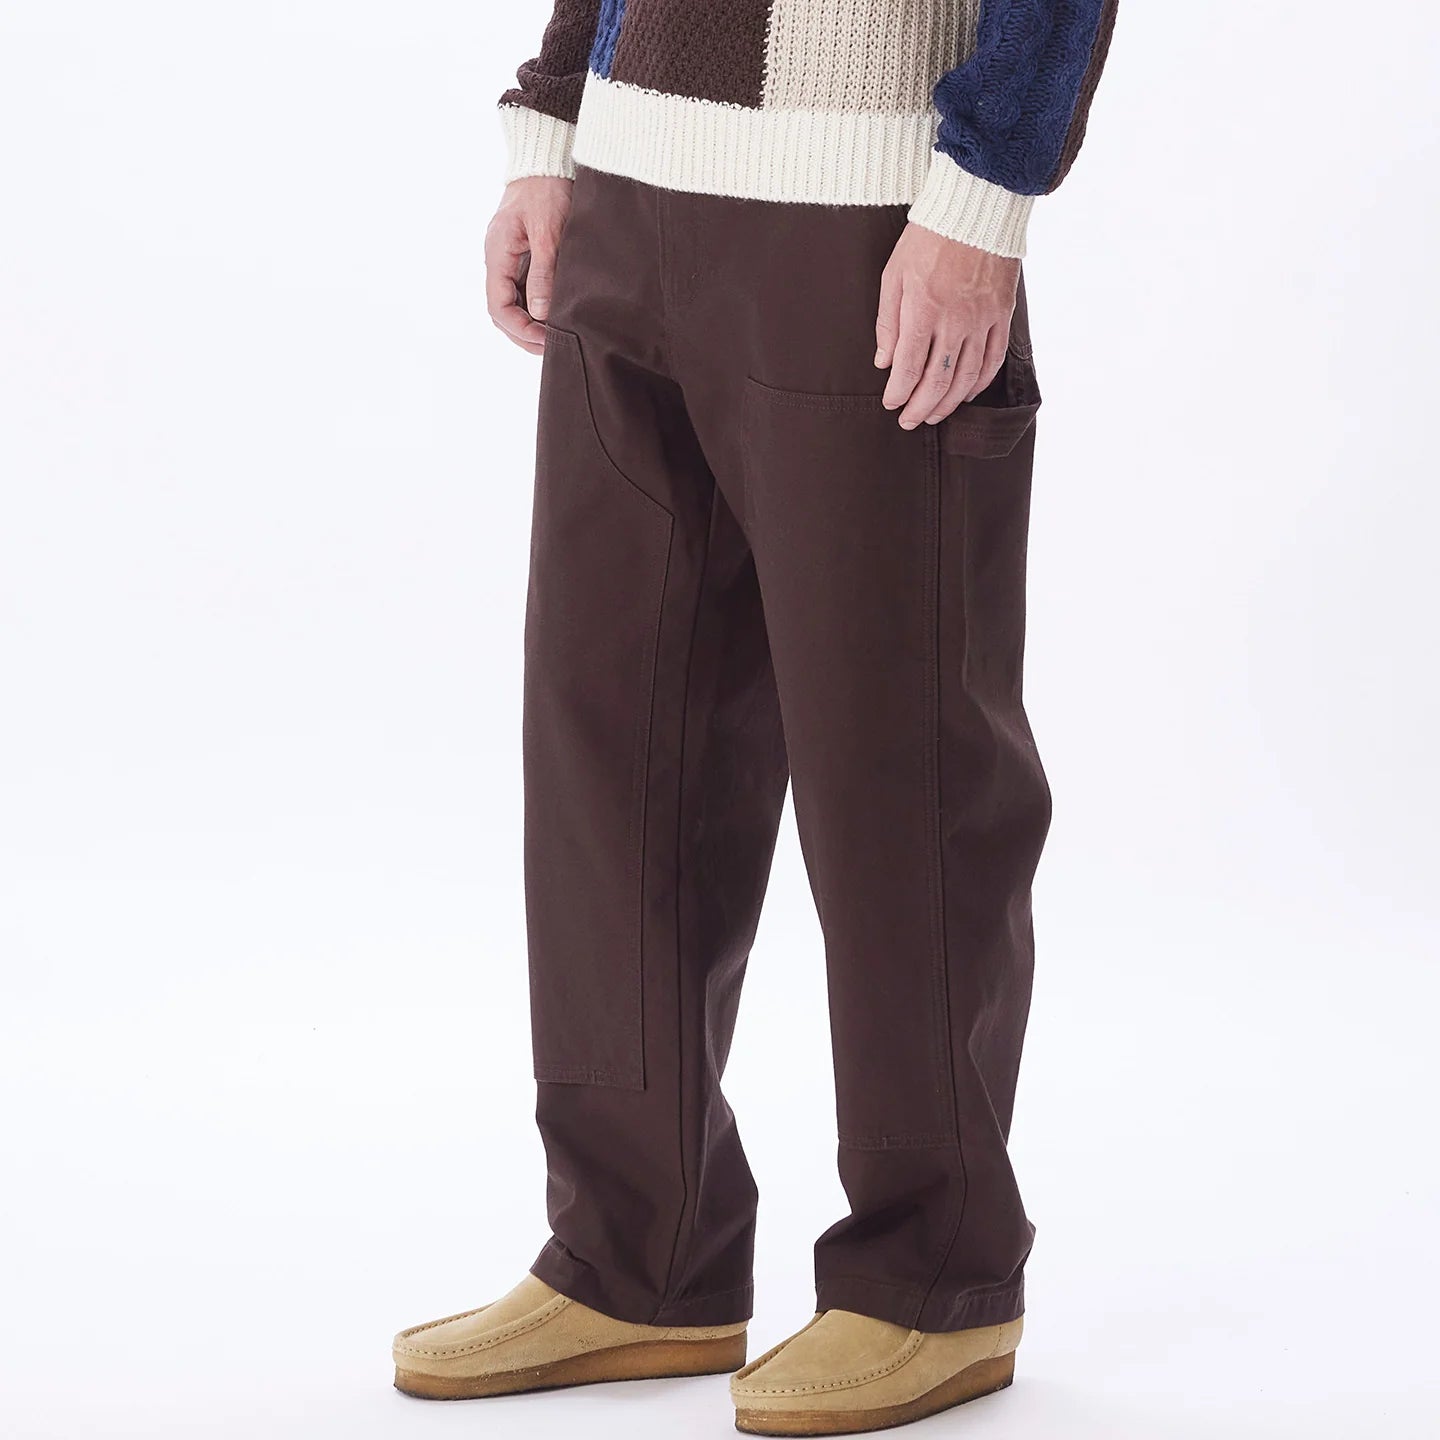 Big timer twill double knee carpenter pant (Java brown)